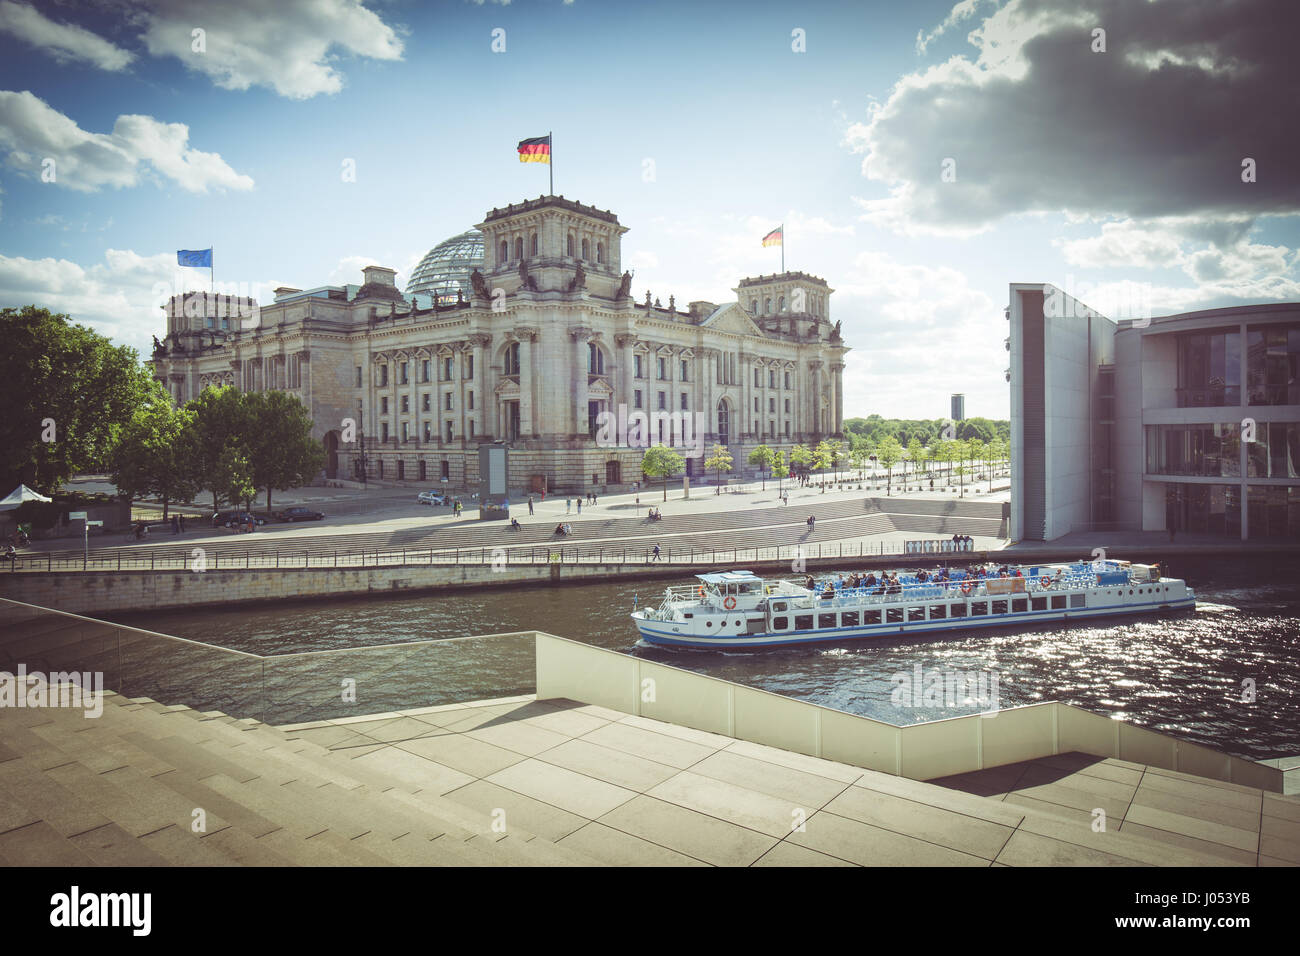 Panoramic view of Berlin government district with excursion boat on Spree river passing famous Reichstag building and Paul Lobe Haus on a sunny day Stock Photo